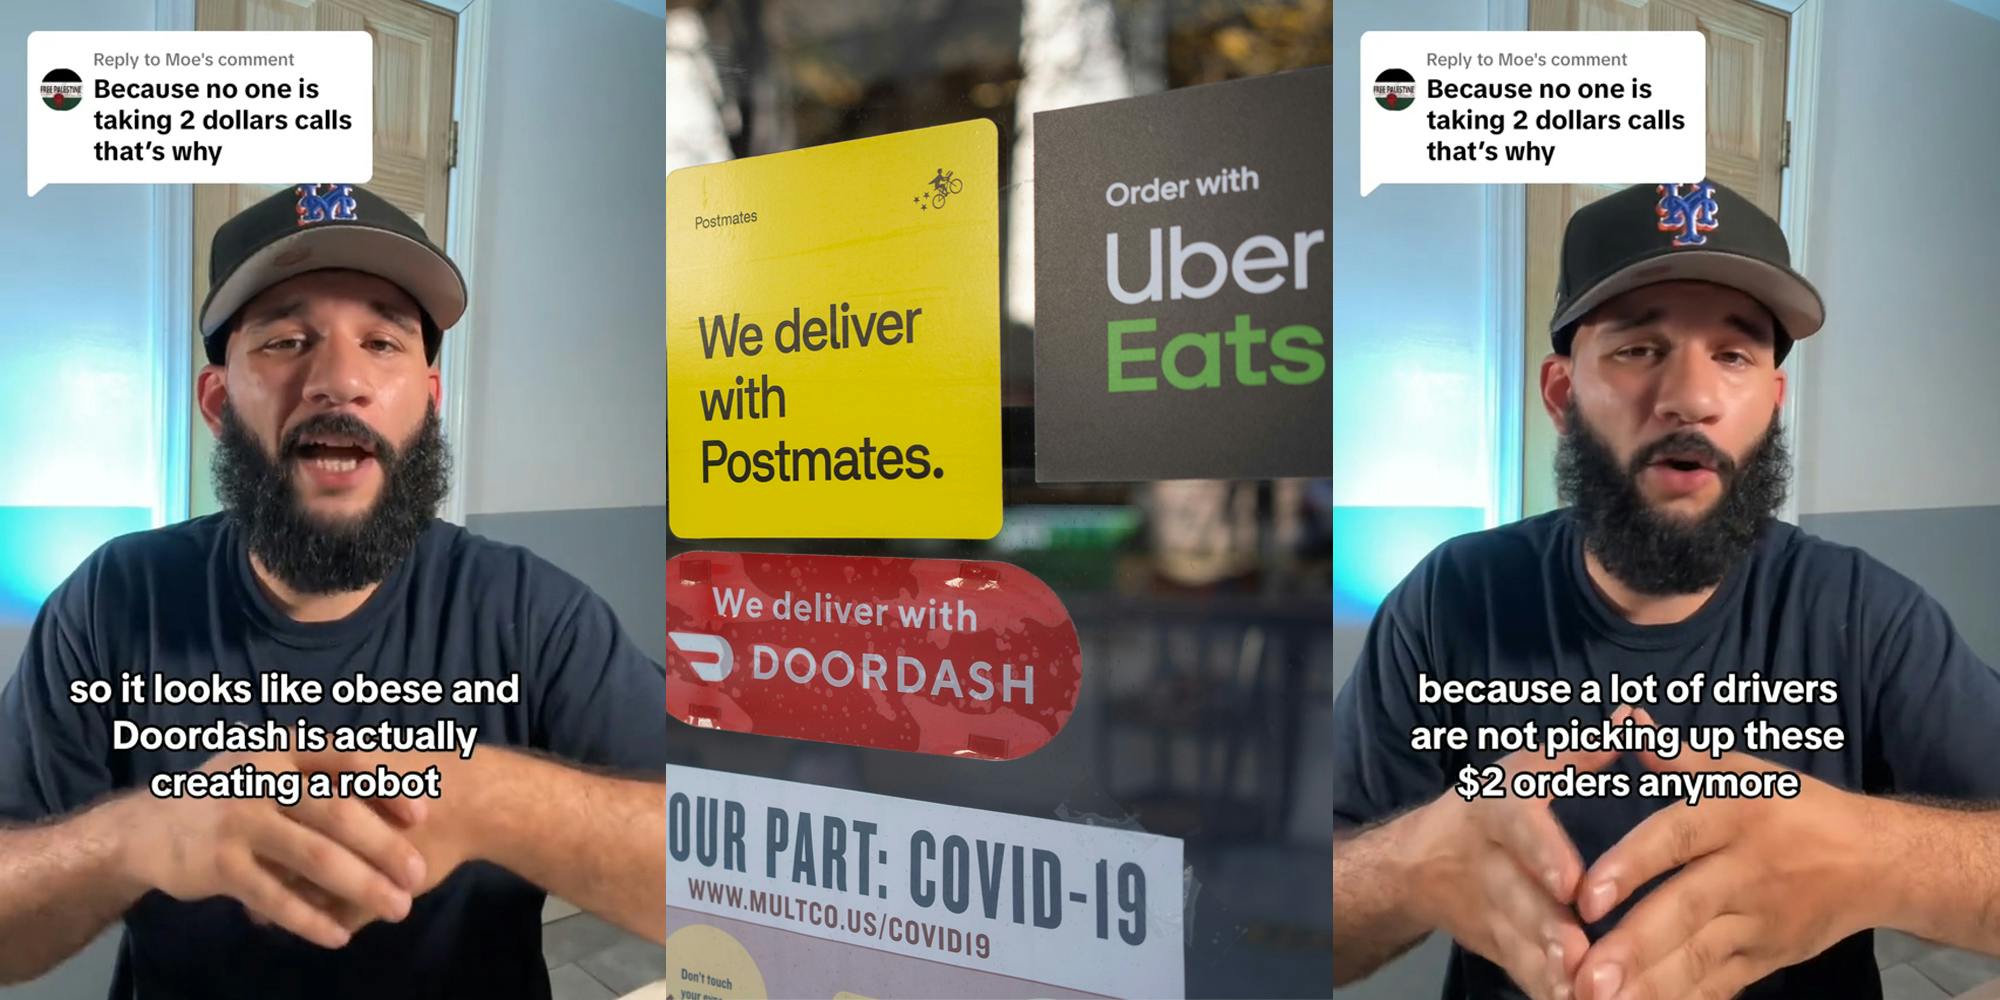 Uber Eats driver speaking with caption "Because no one is taking 2 dollars calls that's why" "so it looks like obese and Doordash is actually creating a robot" (l) DoorDash Uber Eats signs on glass door (c) Uber Eats driver speaking with caption "Because no one is taking 2 dollars calls that's why" "because a lot of drivers are not picking up these $2 orders anymore" (r)